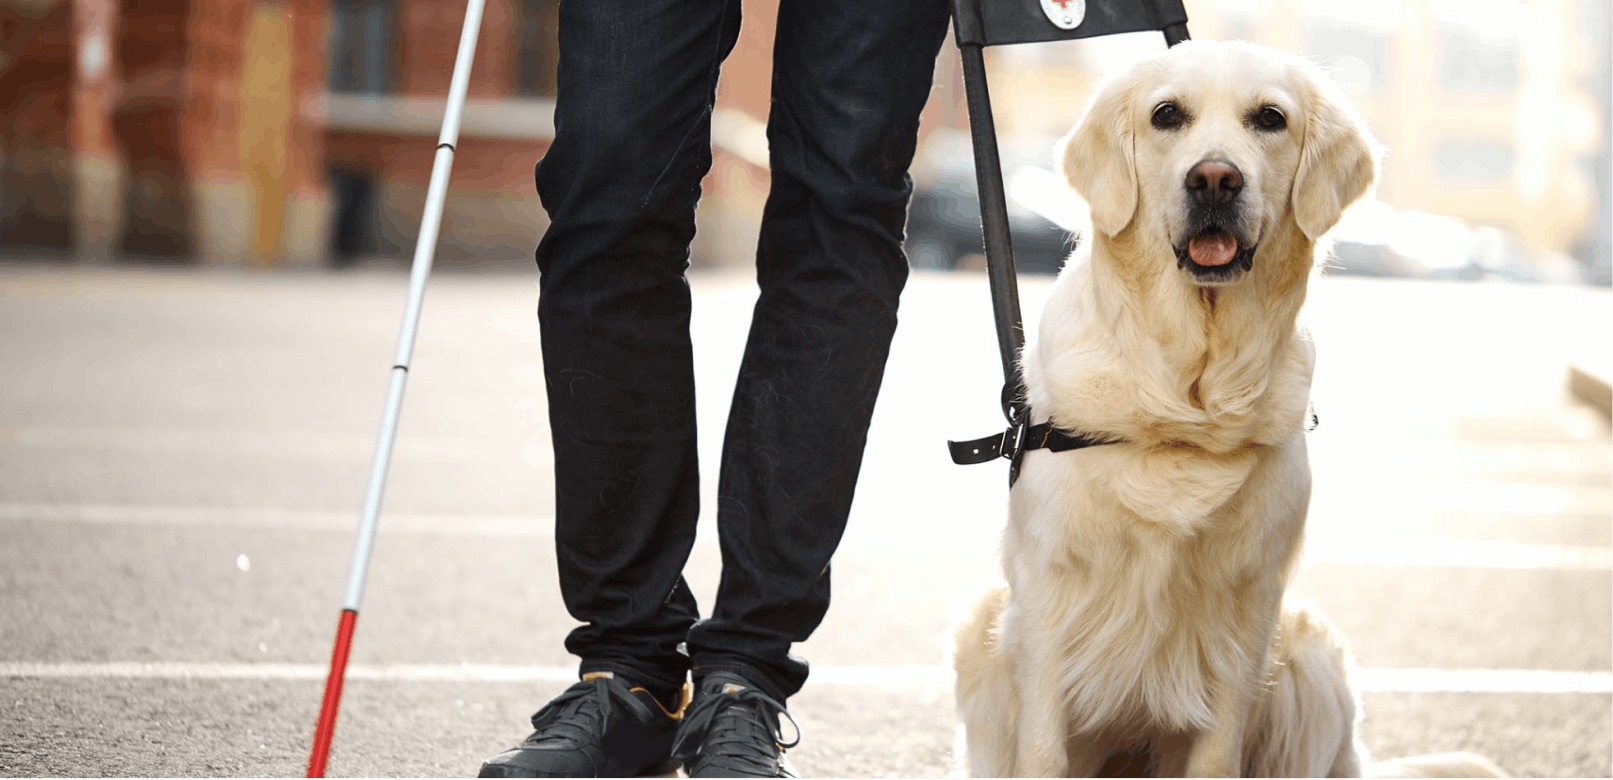 Will Insurance Pay for a Service Dog?